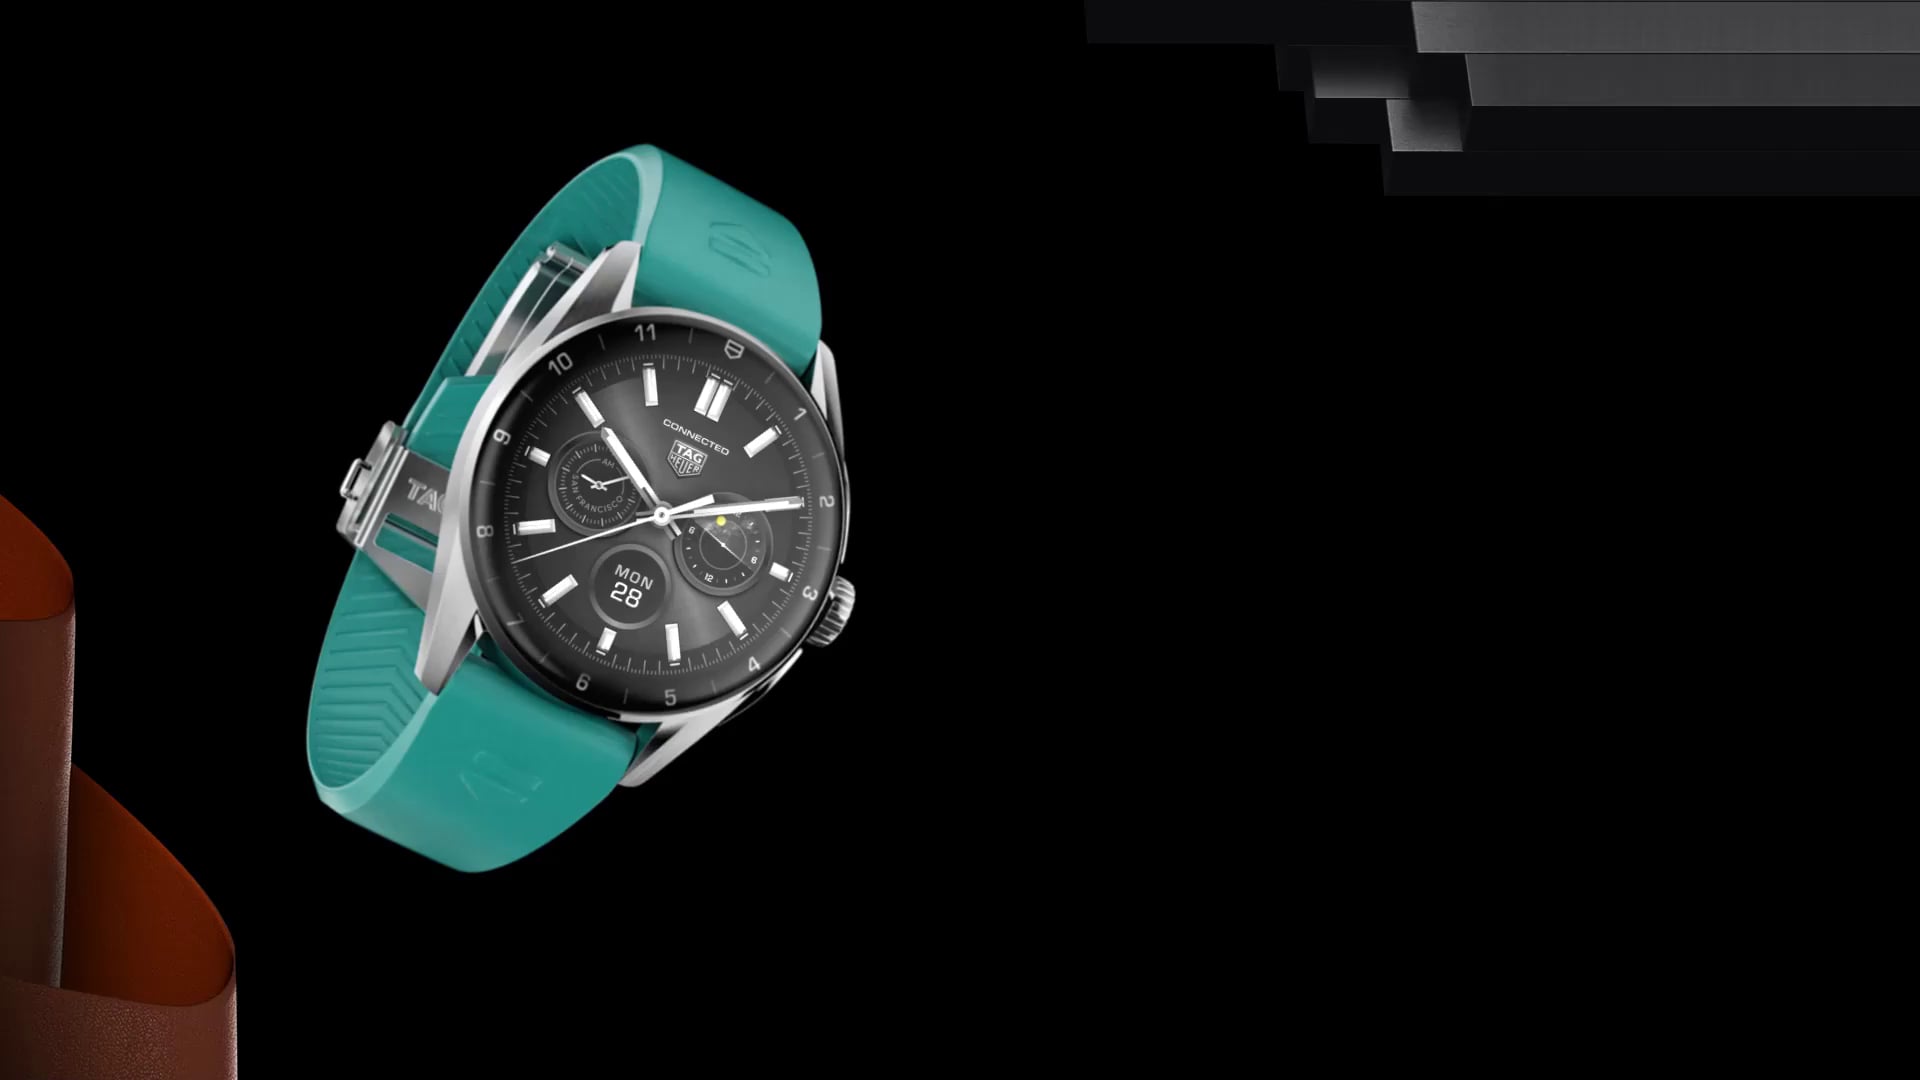 Tag Heuer Connected Watch Faces Quick Look 